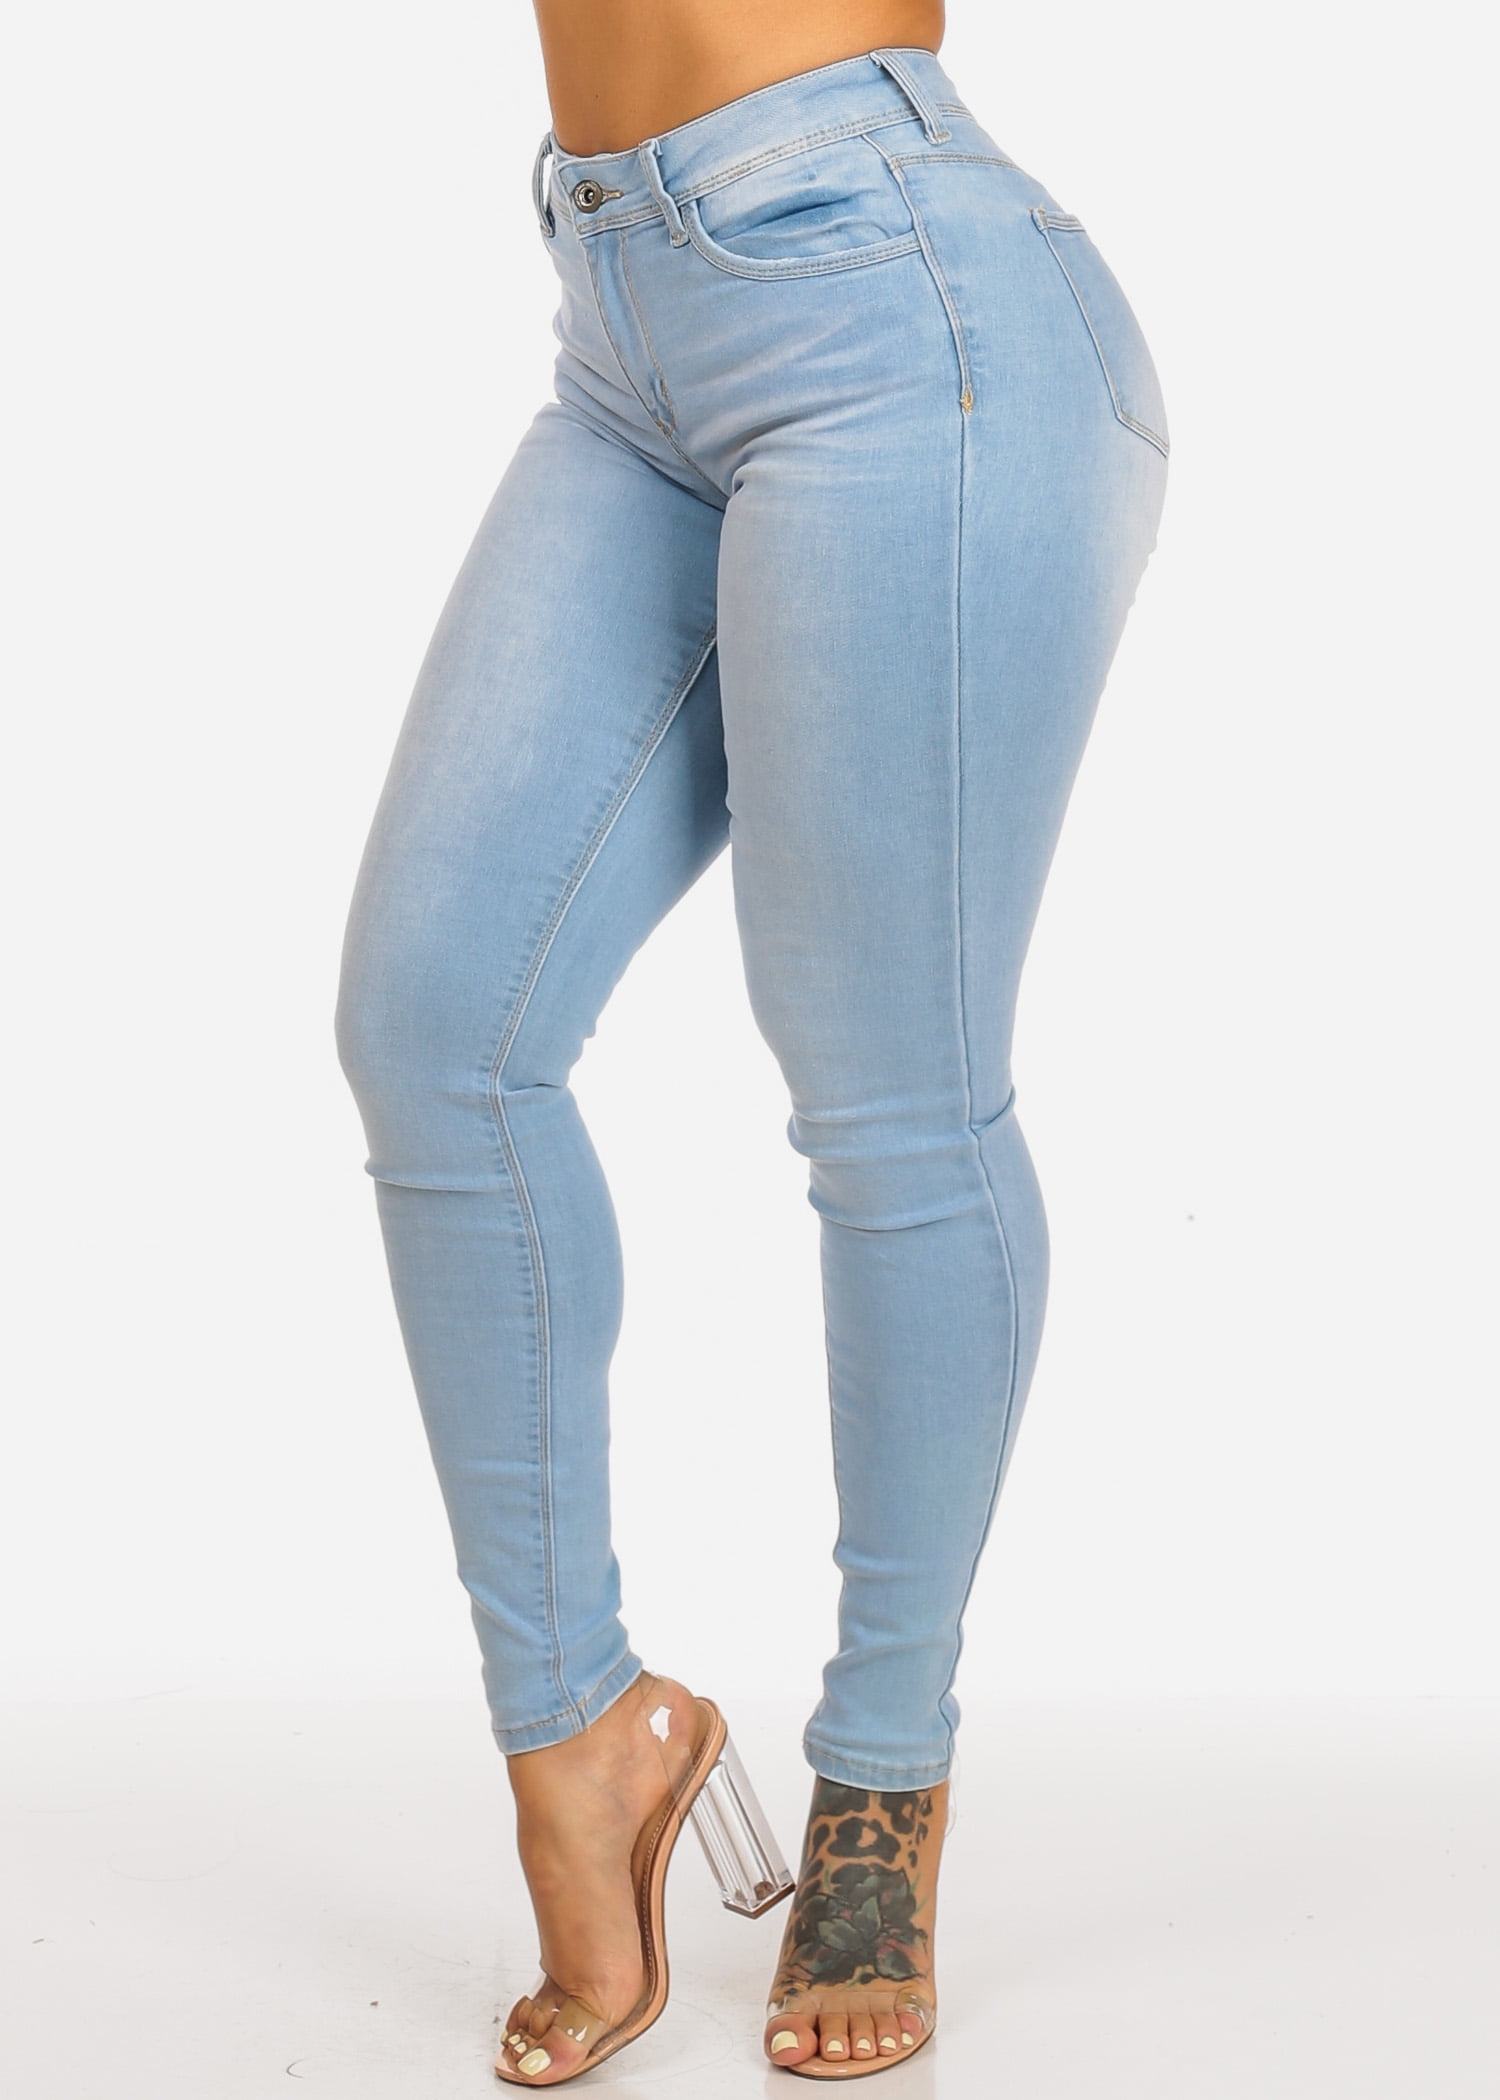 light colored high waisted jeans